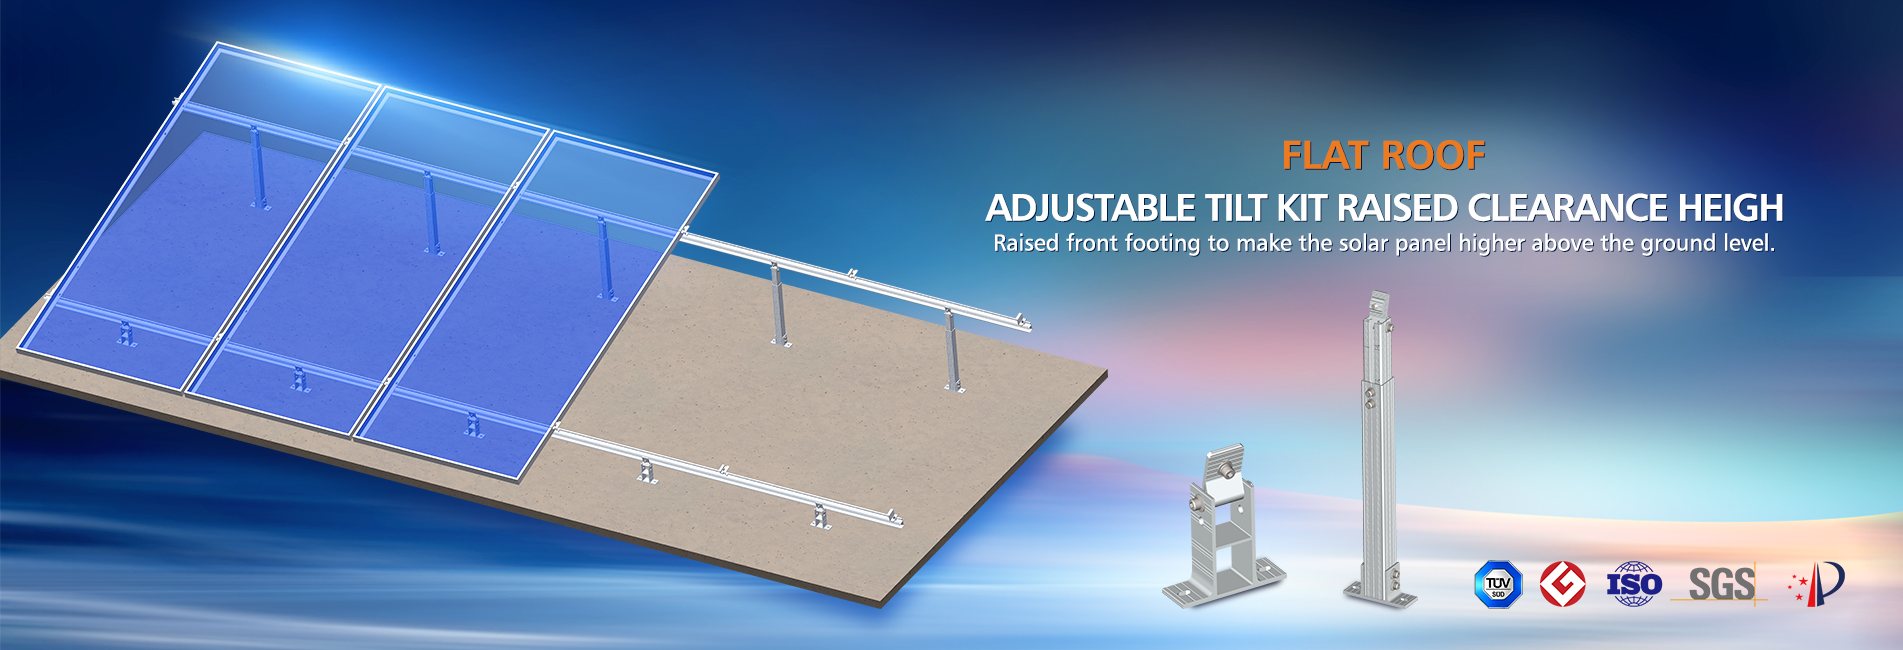 Higher angle degree solar mounting